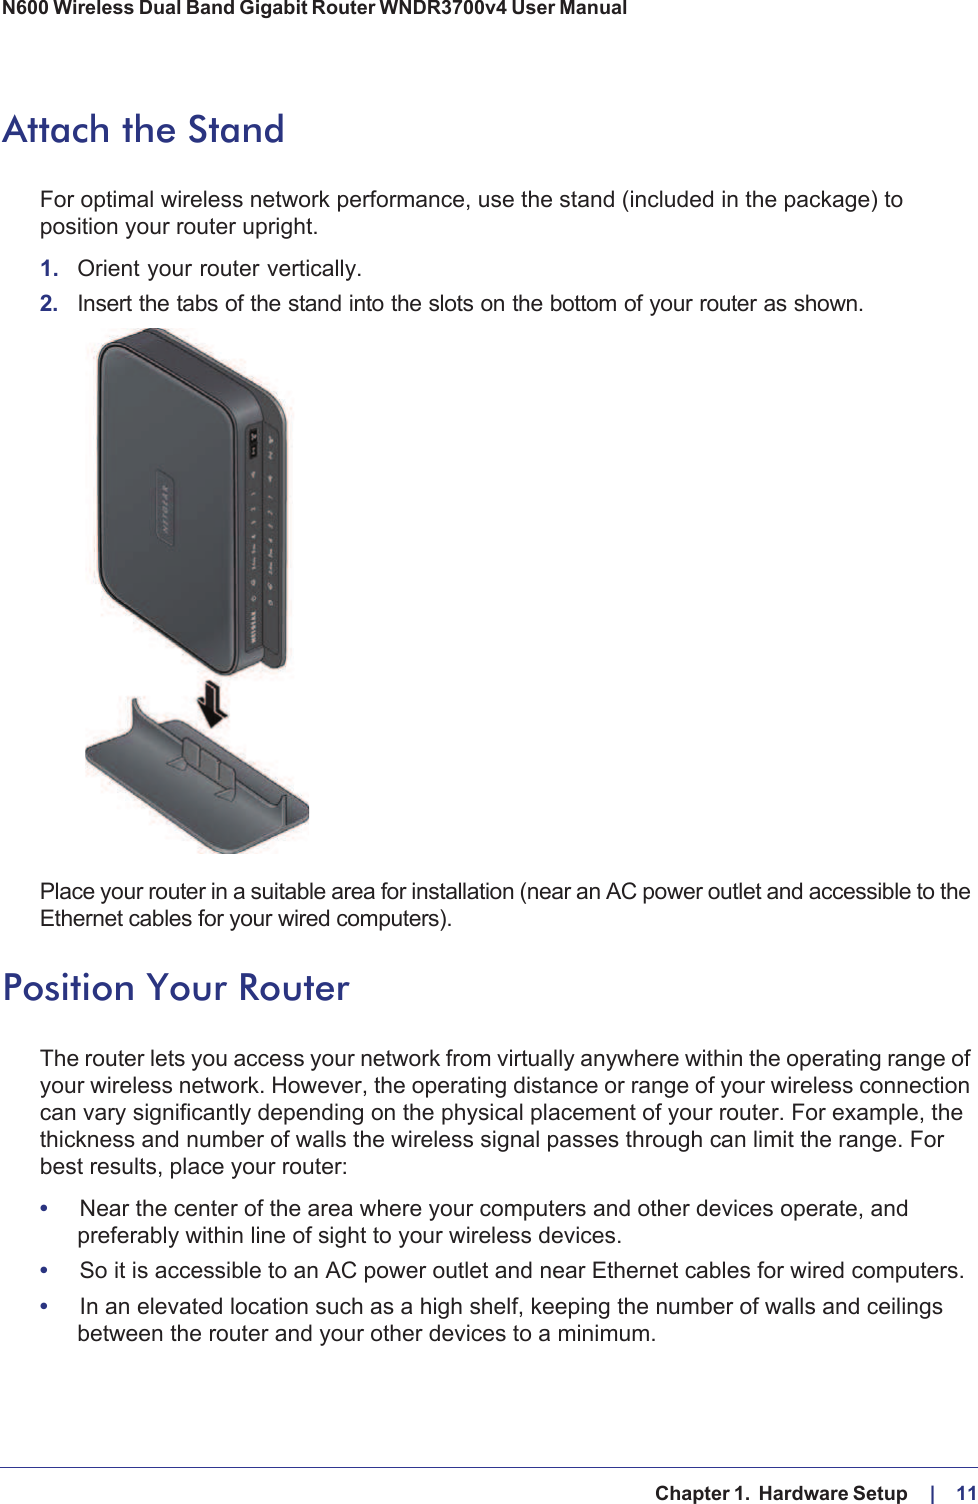   Chapter 1.  Hardware Setup     |    11N600 Wireless Dual Band Gigabit Router WNDR3700v4 User Manual Attach the StandFor optimal wireless network performance, use the stand (included in the package) to position your router upright. 1. Orient your router vertically.2. Insert the tabs of the stand into the slots on the bottom of your router as shown. Place your router in a suitable area for installation (near an AC power outlet and accessible to the Ethernet cables for your wired computers). Position Your RouterThe router lets you access your network from virtually anywhere within the operating range of your wireless network. However, the operating distance or range of your wireless connection can vary significantly depending on the physical placement of your router. For example, the thickness and number of walls the wireless signal passes through can limit the range. For best results, place your router: •Near the center of the area where your computers and other devices operate, and preferably within line of sight to your wireless devices.•So it is accessible to an AC power outlet and near Ethernet cables for wired computers.•In an elevated location such as a high shelf, keeping the number of walls and ceilings between the router and your other devices to a minimum.